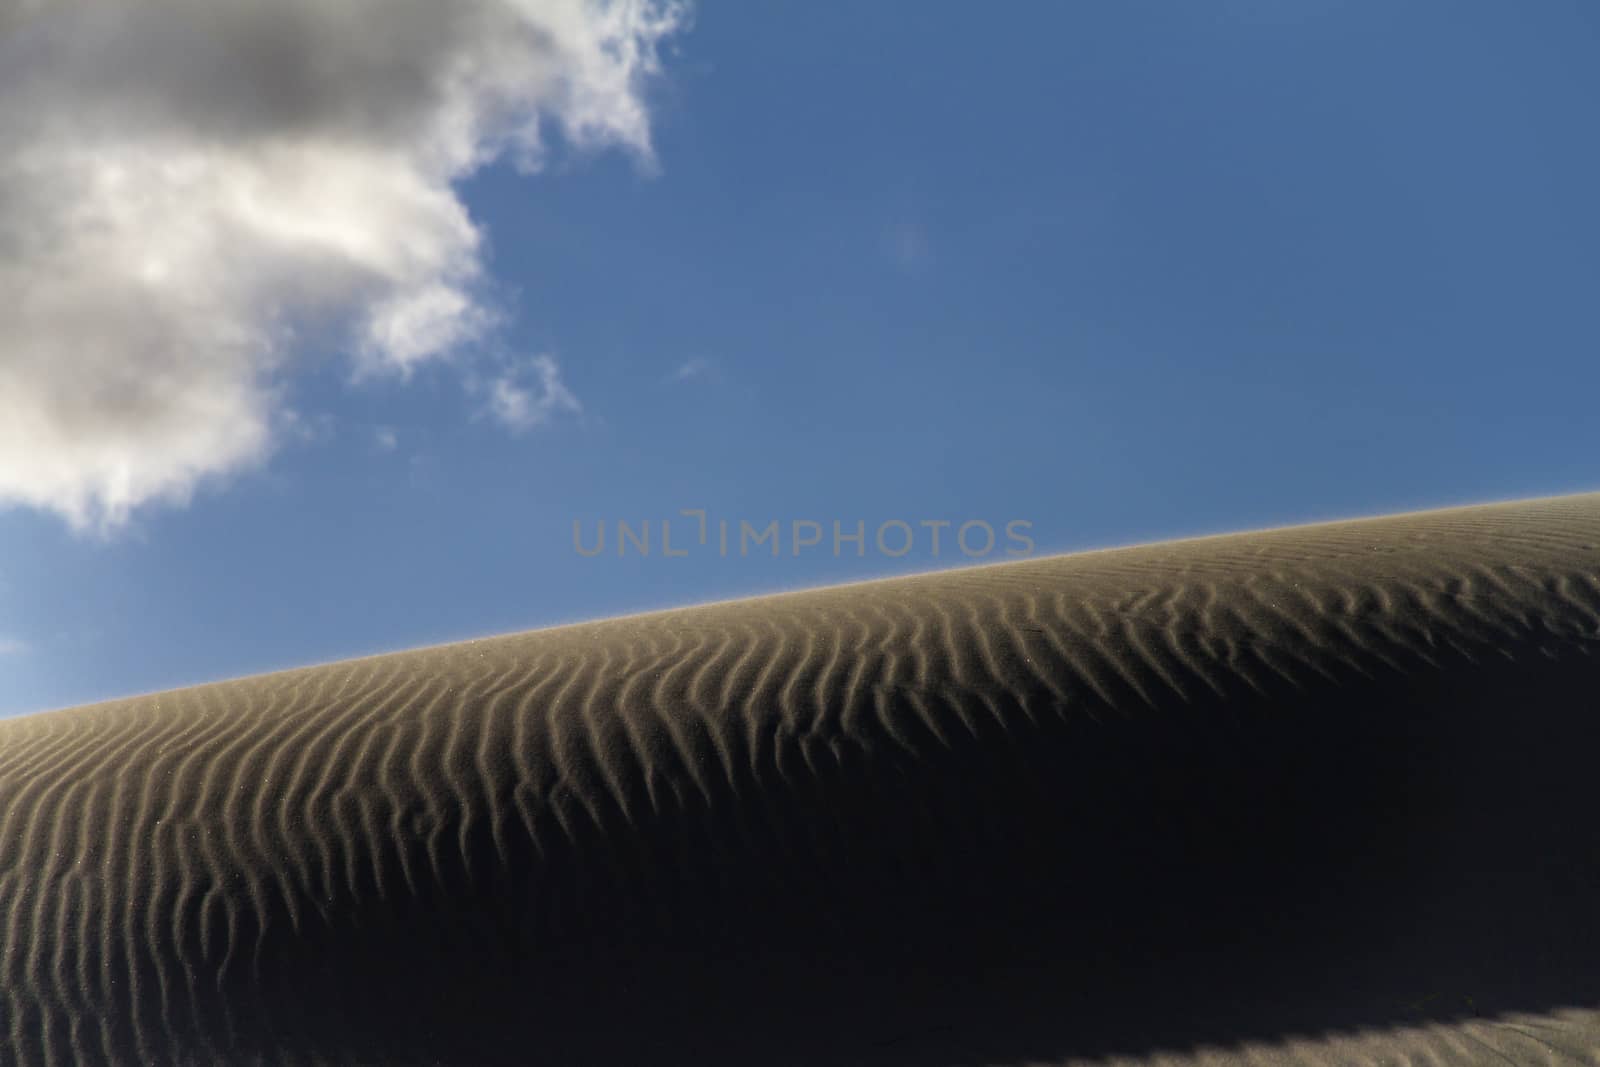 Shadow play on a sand dune with backlight effect and the sun shining in the blue sky with white one cloud